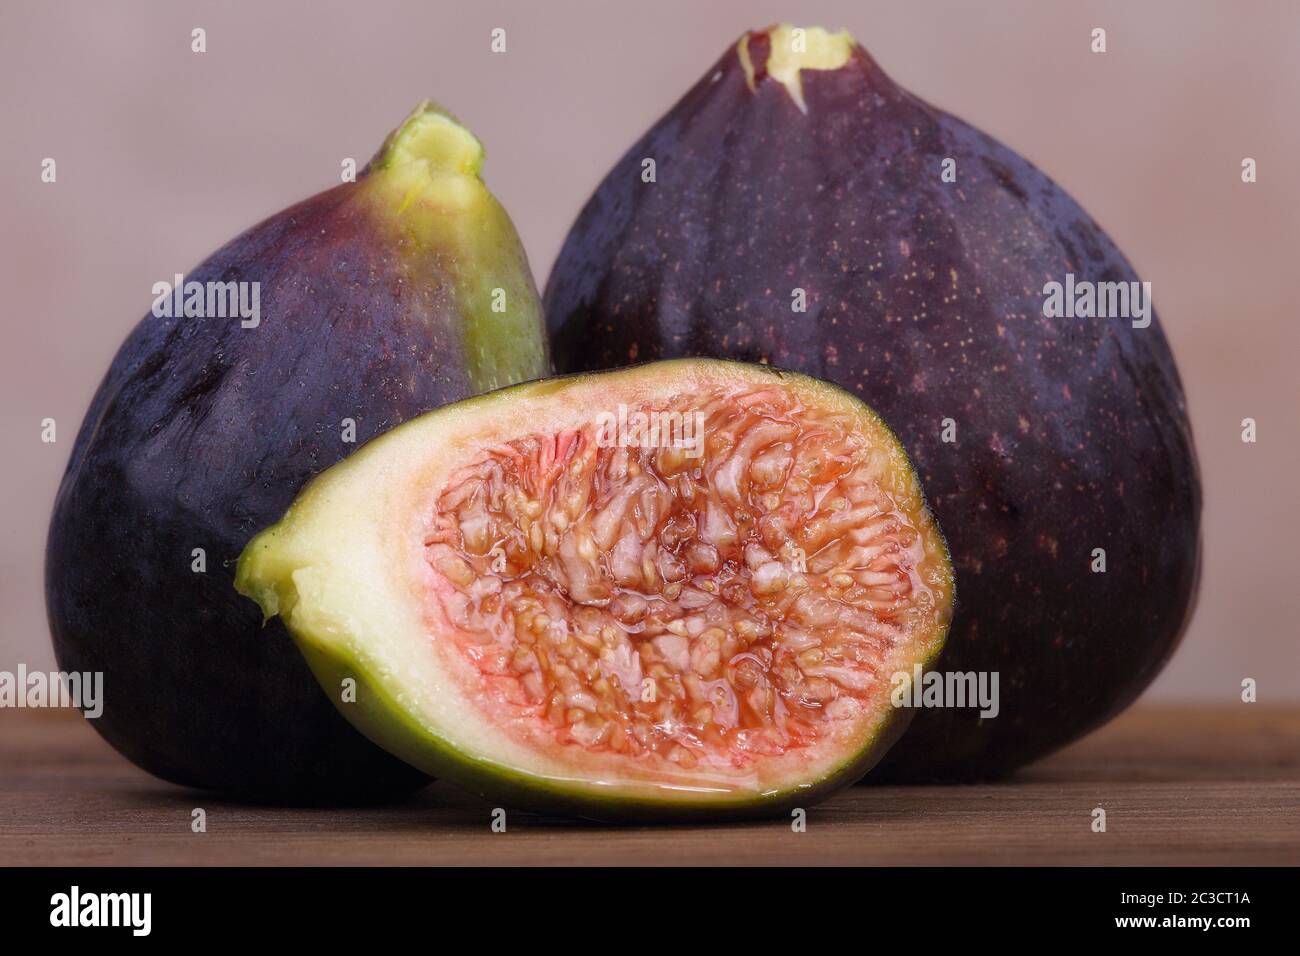 figs on the wooden table Stock Photo